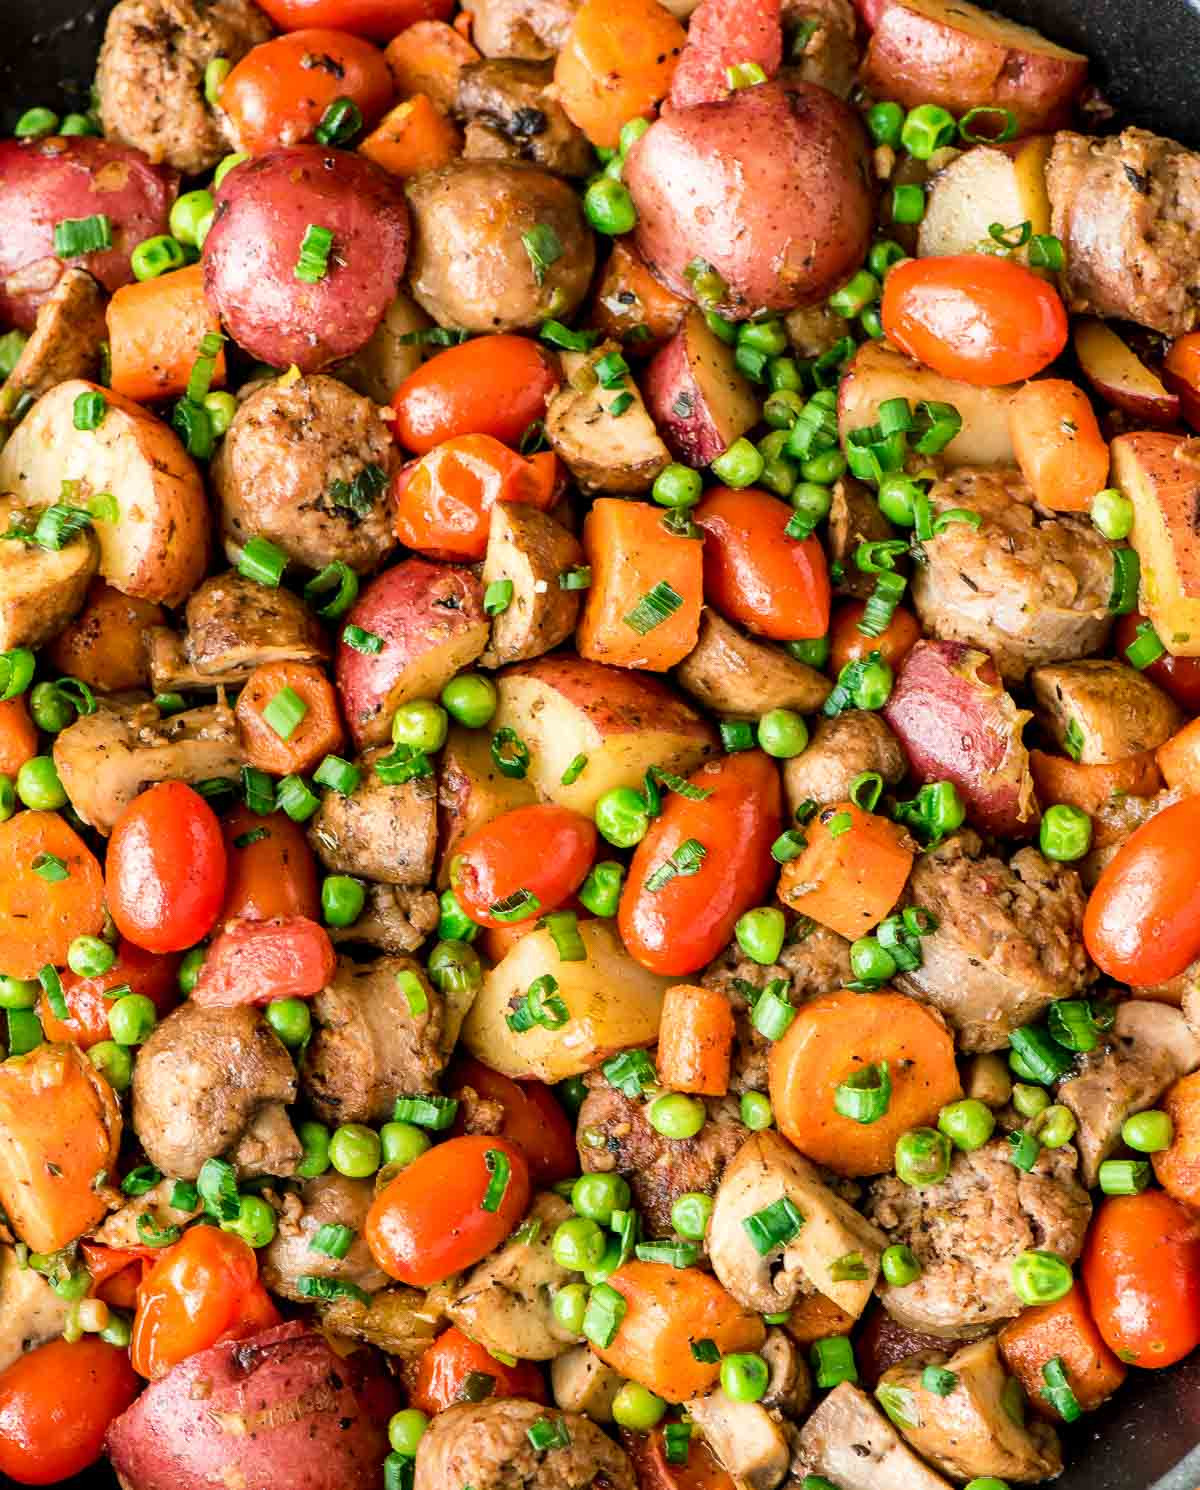 Recipes Using Italian Sausage
 Italian Sausage Skillet with Ve ables and Potatoes